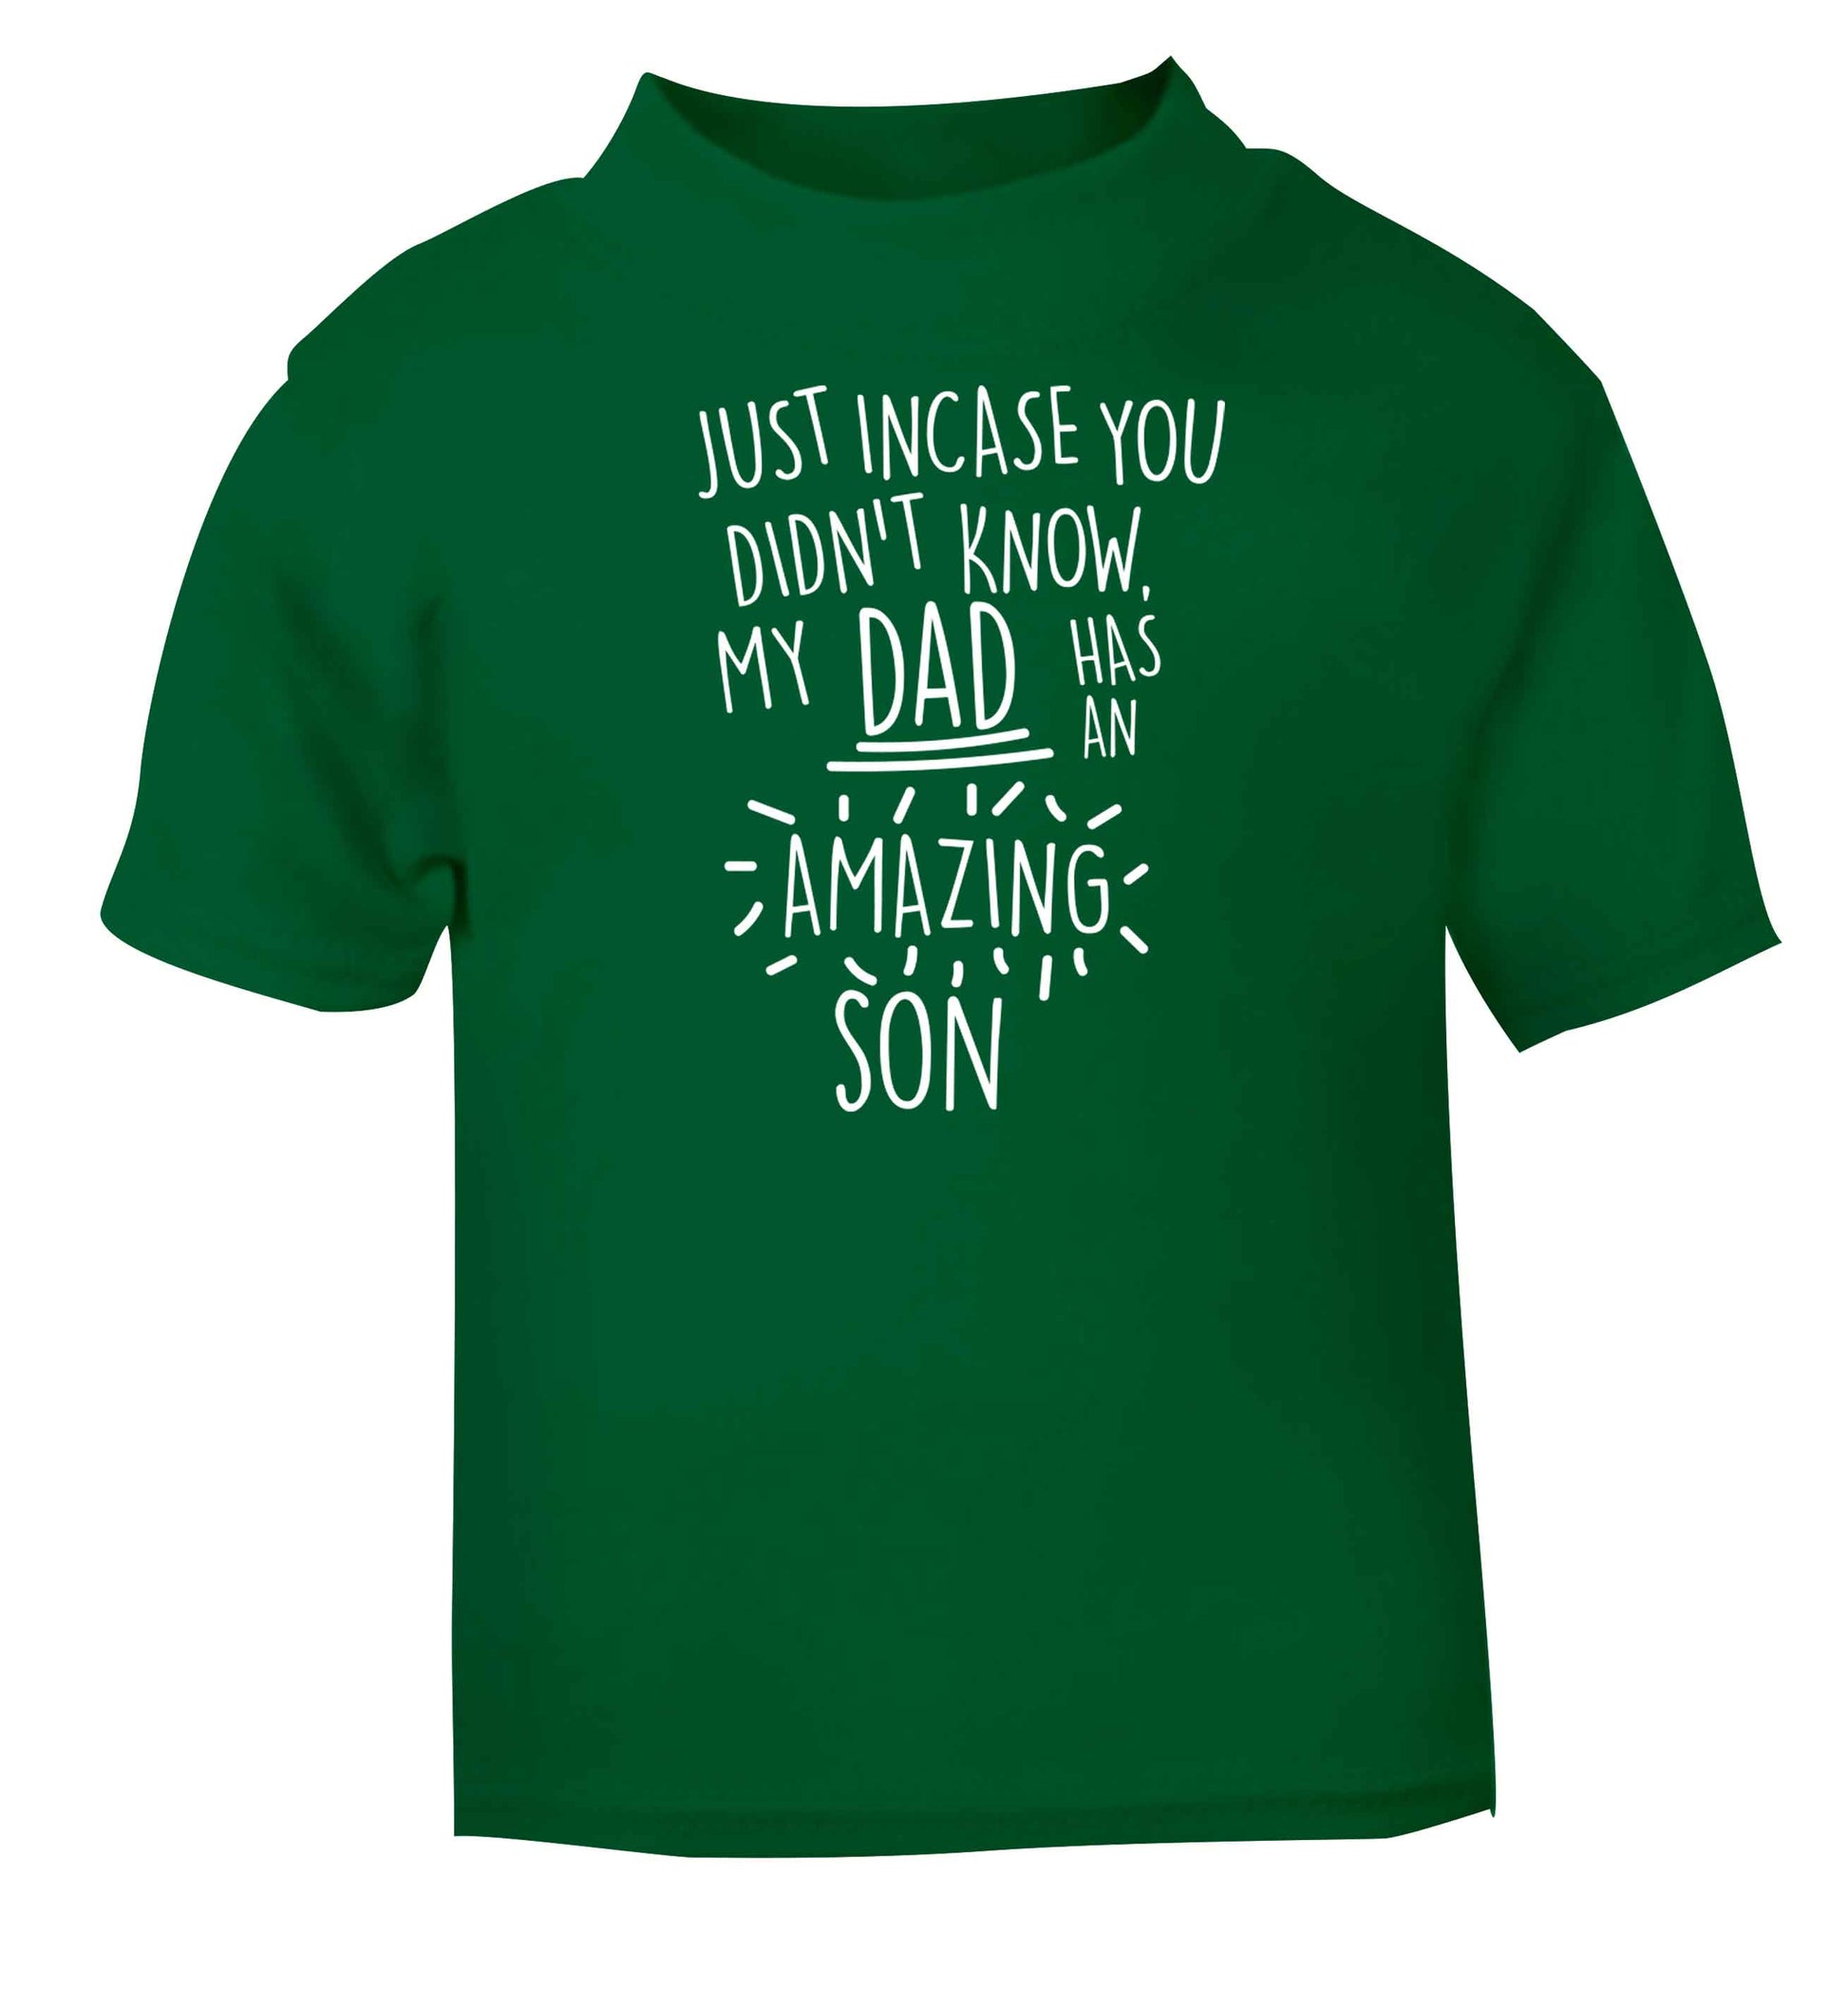 Just incase you didn't know my dad has an amazing son green baby toddler Tshirt 2 Years